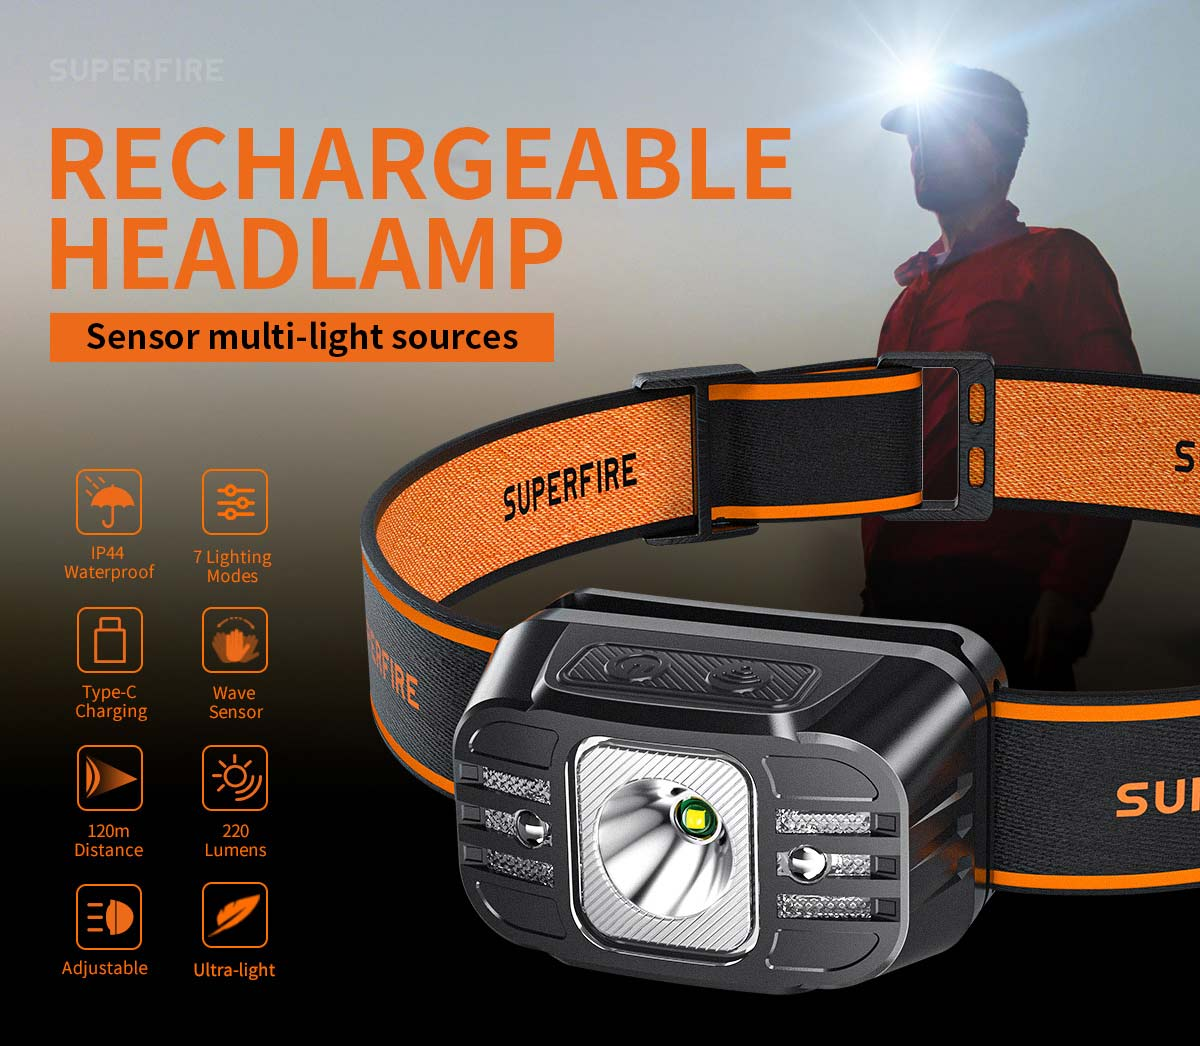 SUPERFIRE Rechargeable Headlamp: The Best Headlamp For Your Pack